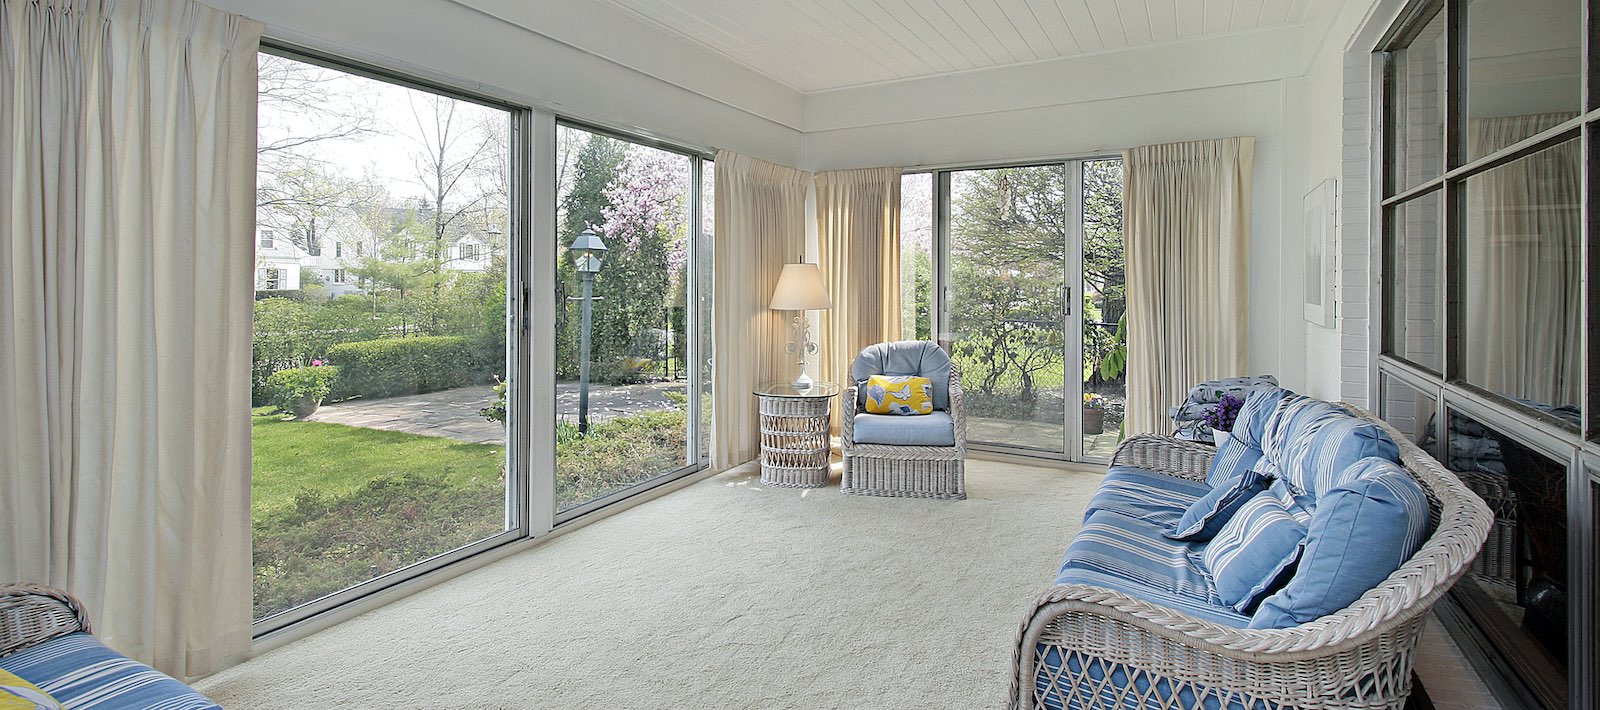 Sunroom in suburban home with patio view